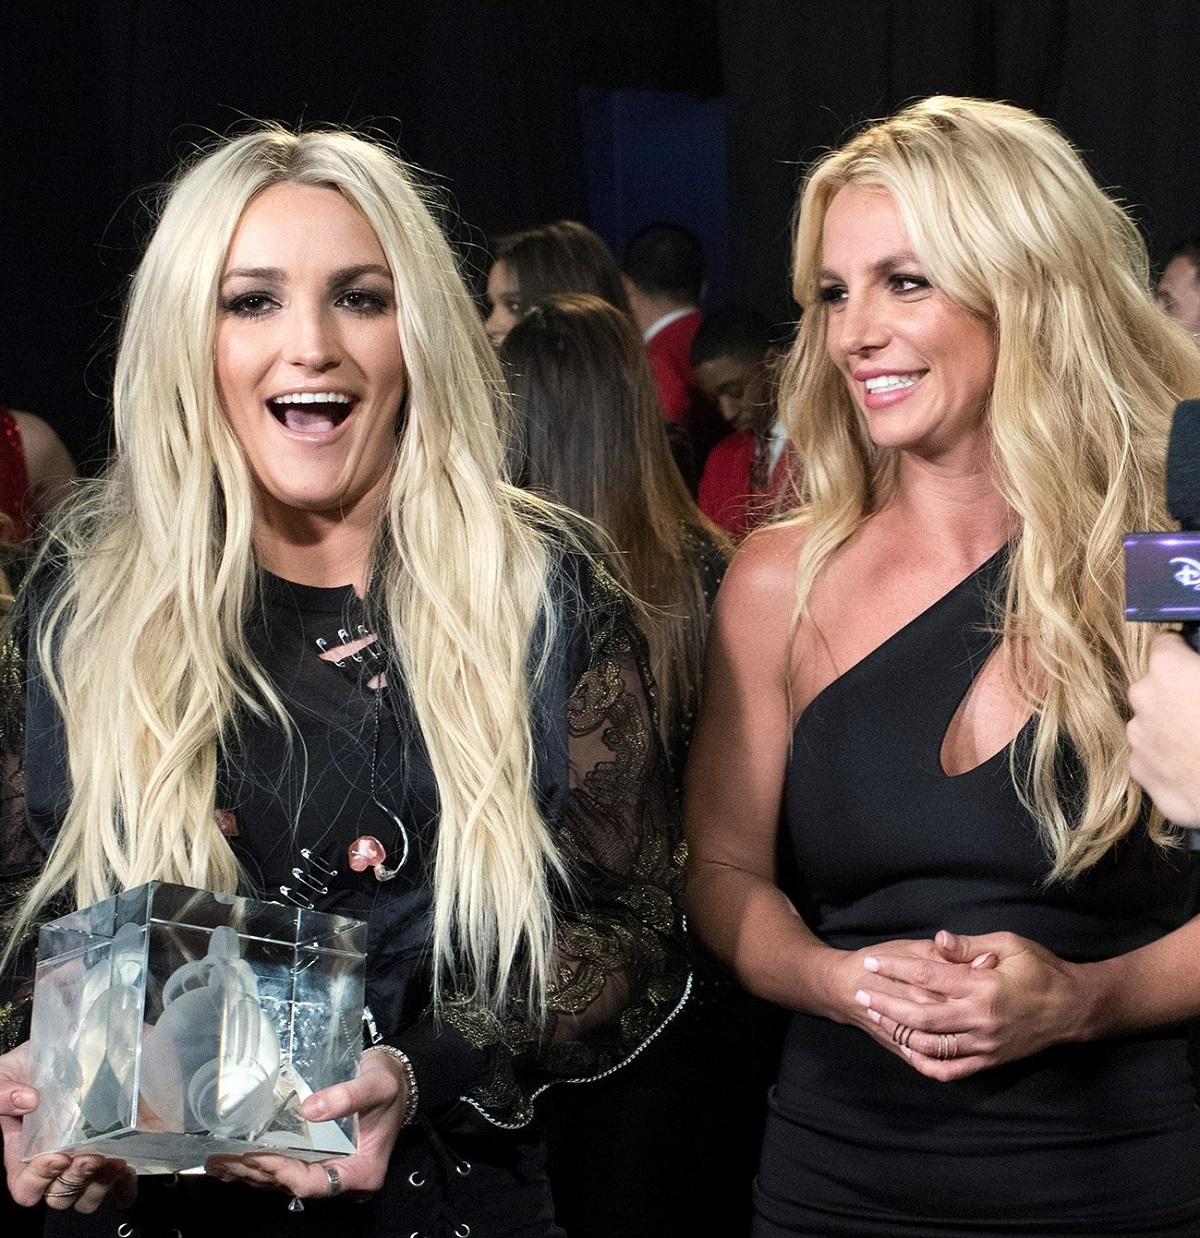 Jamie Lynn Spears and Britney Spears backstage together at the Radio Disney Music Awards